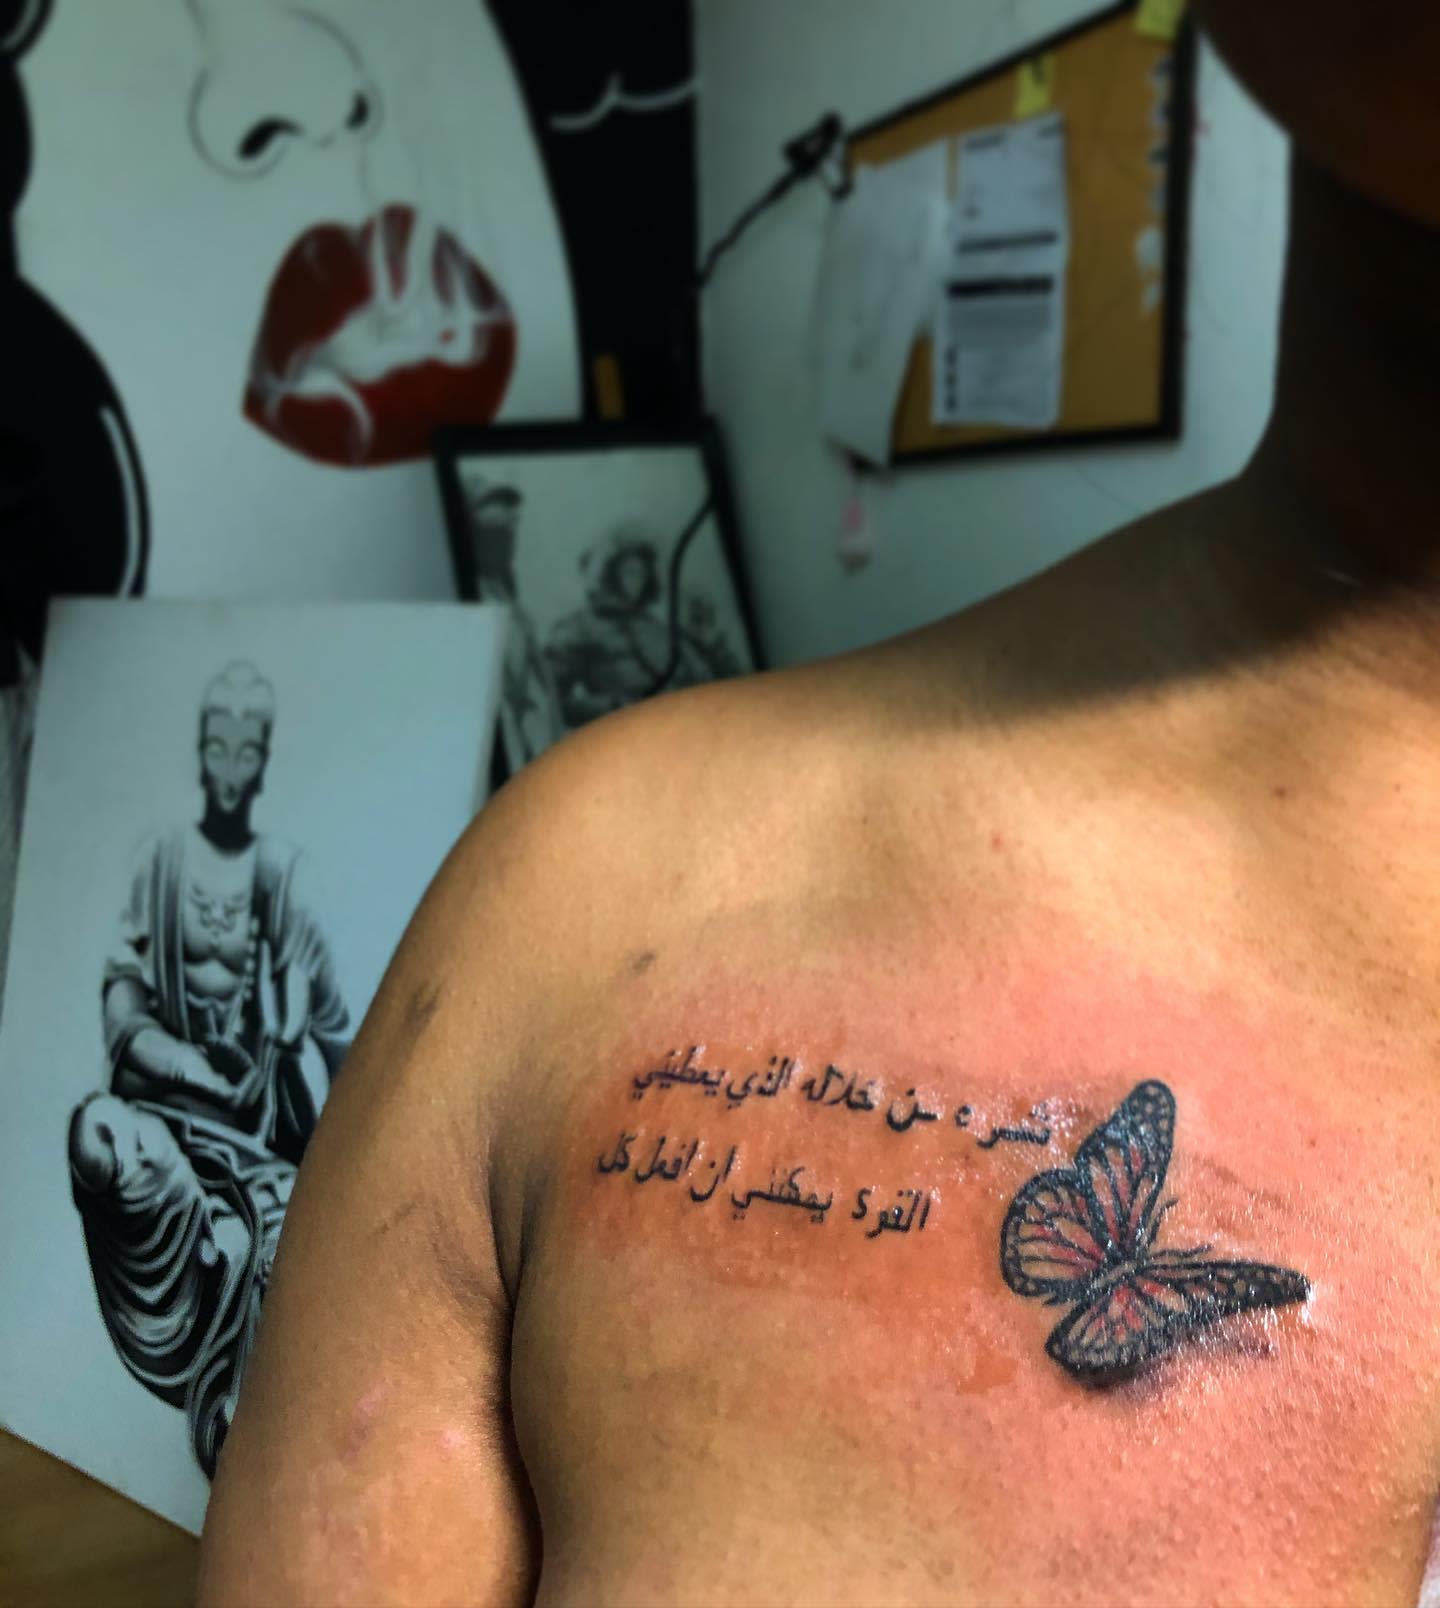 what's your thoughts on Arabic tattoos? : r/AskMiddleEast